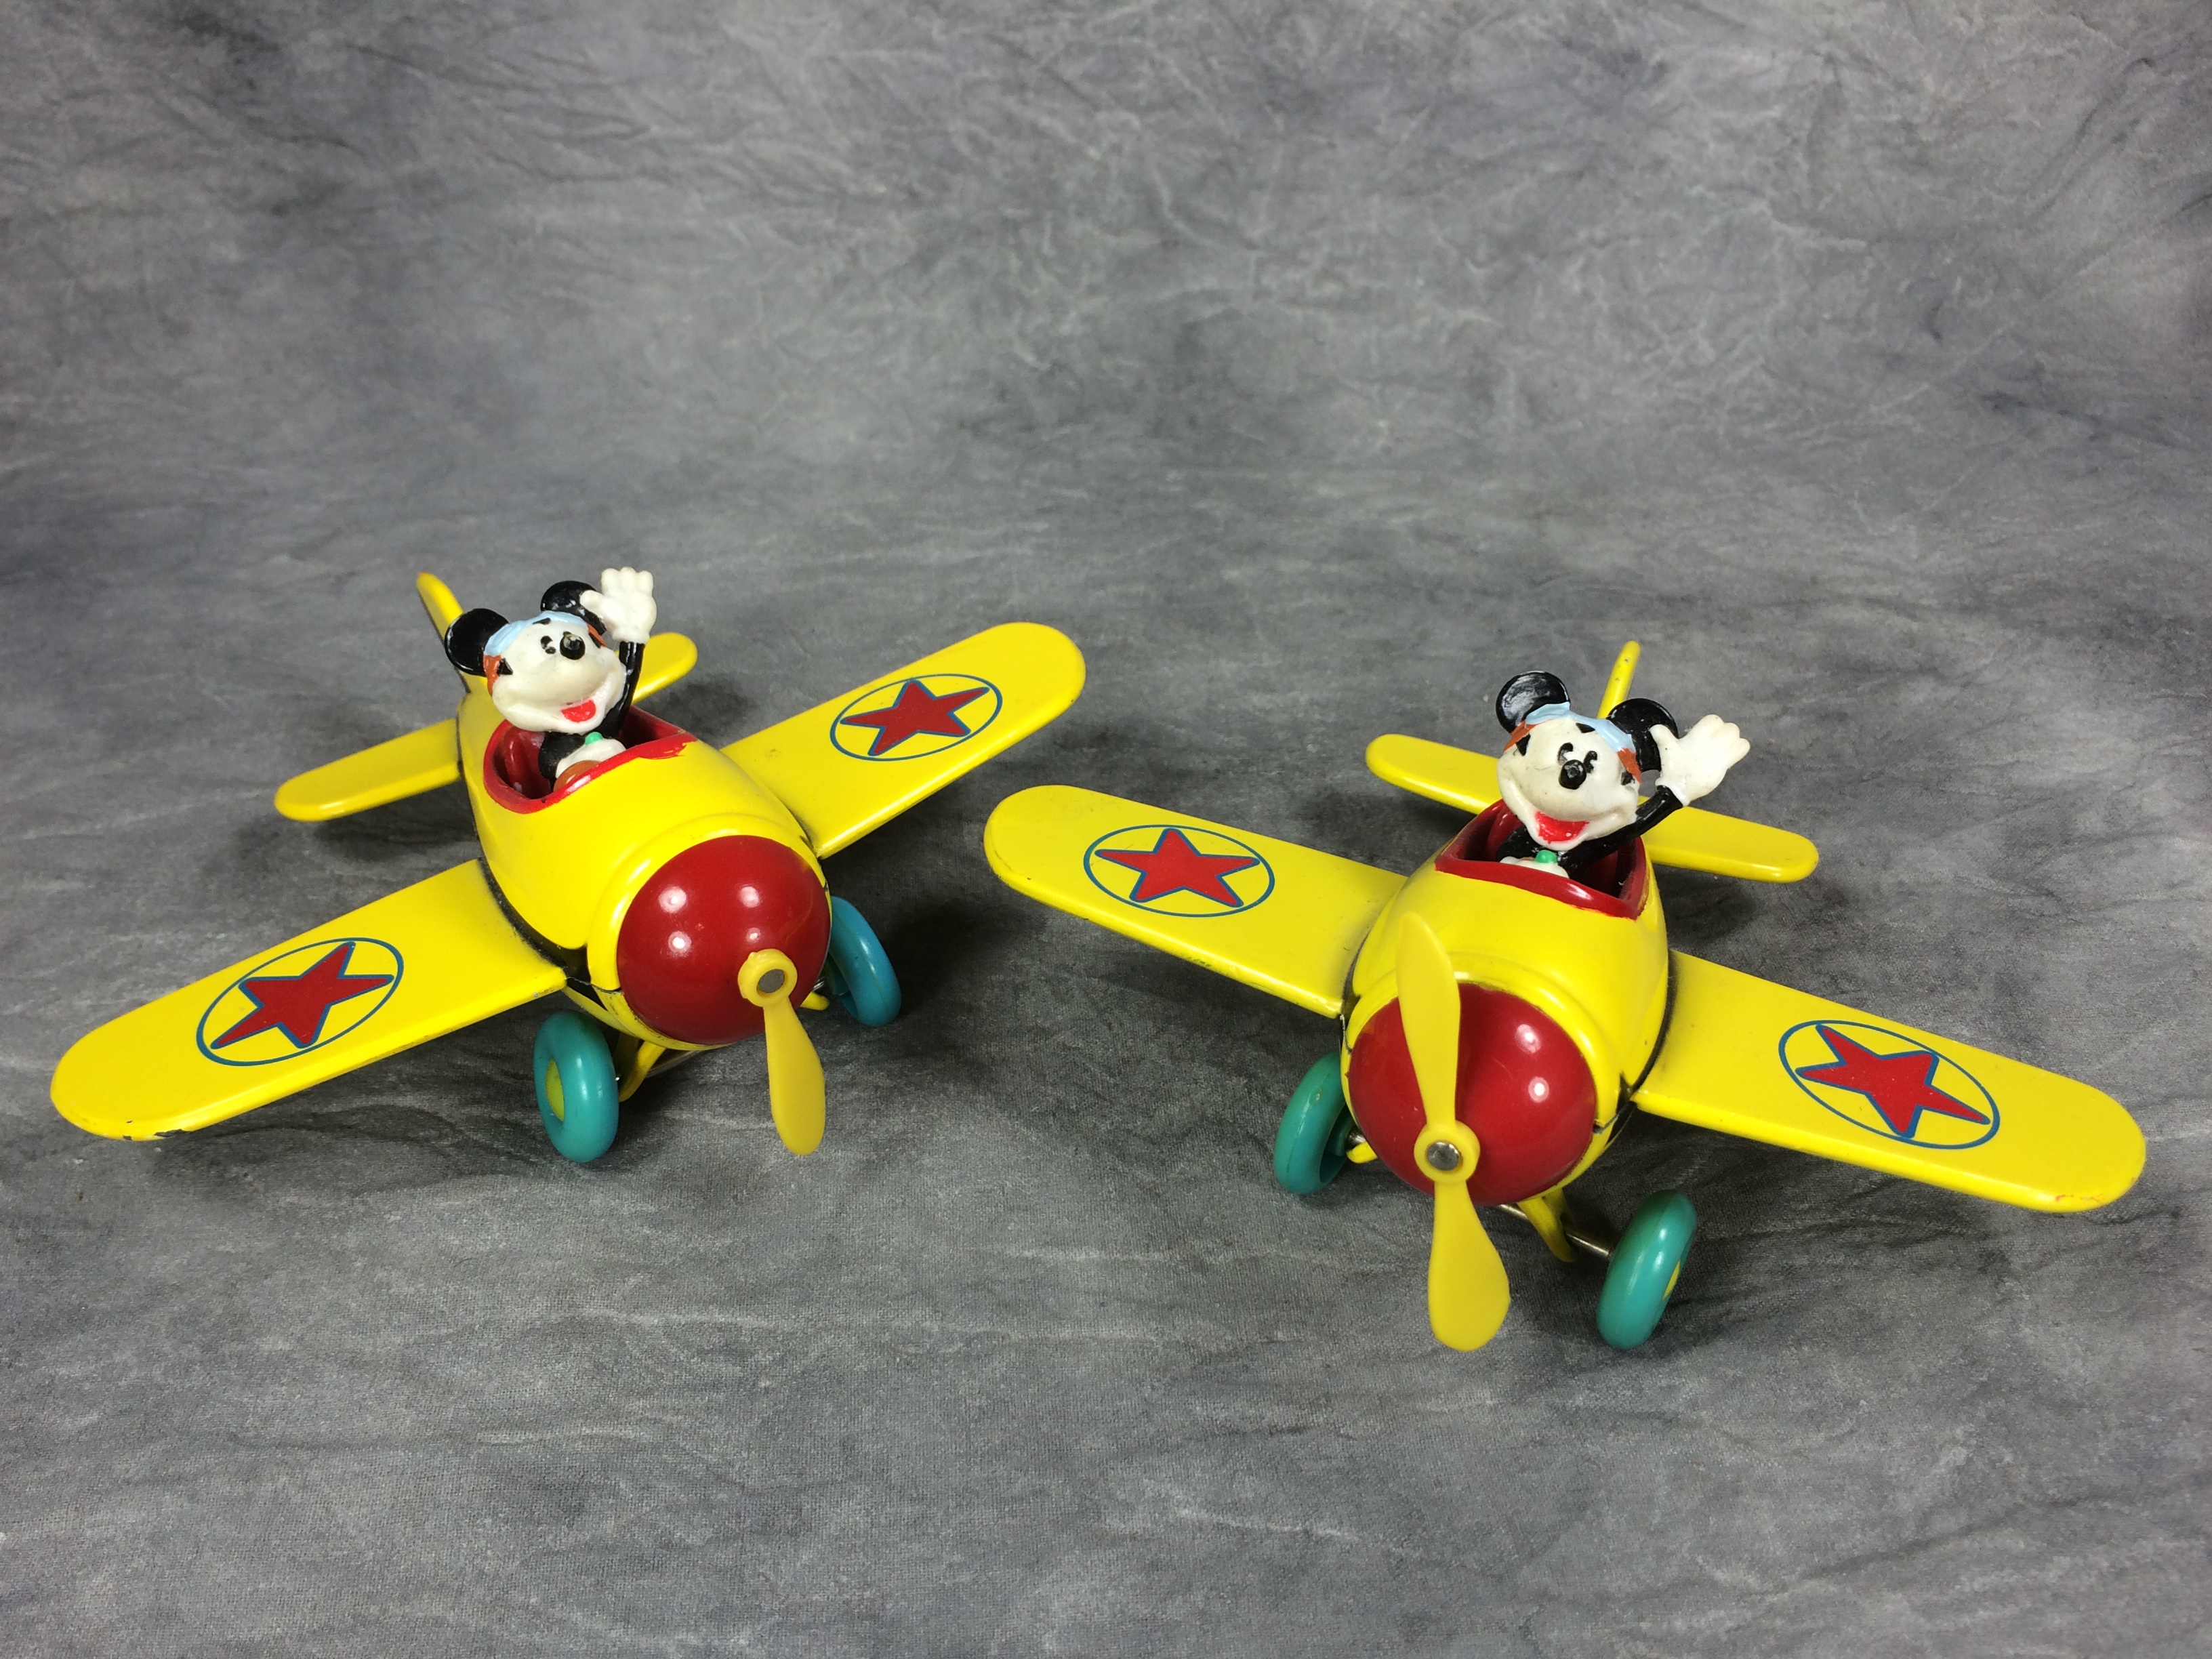 Details about   Vintage Decopac Disney MICKEY MOUSE with DIE CAST PLANE In Package 